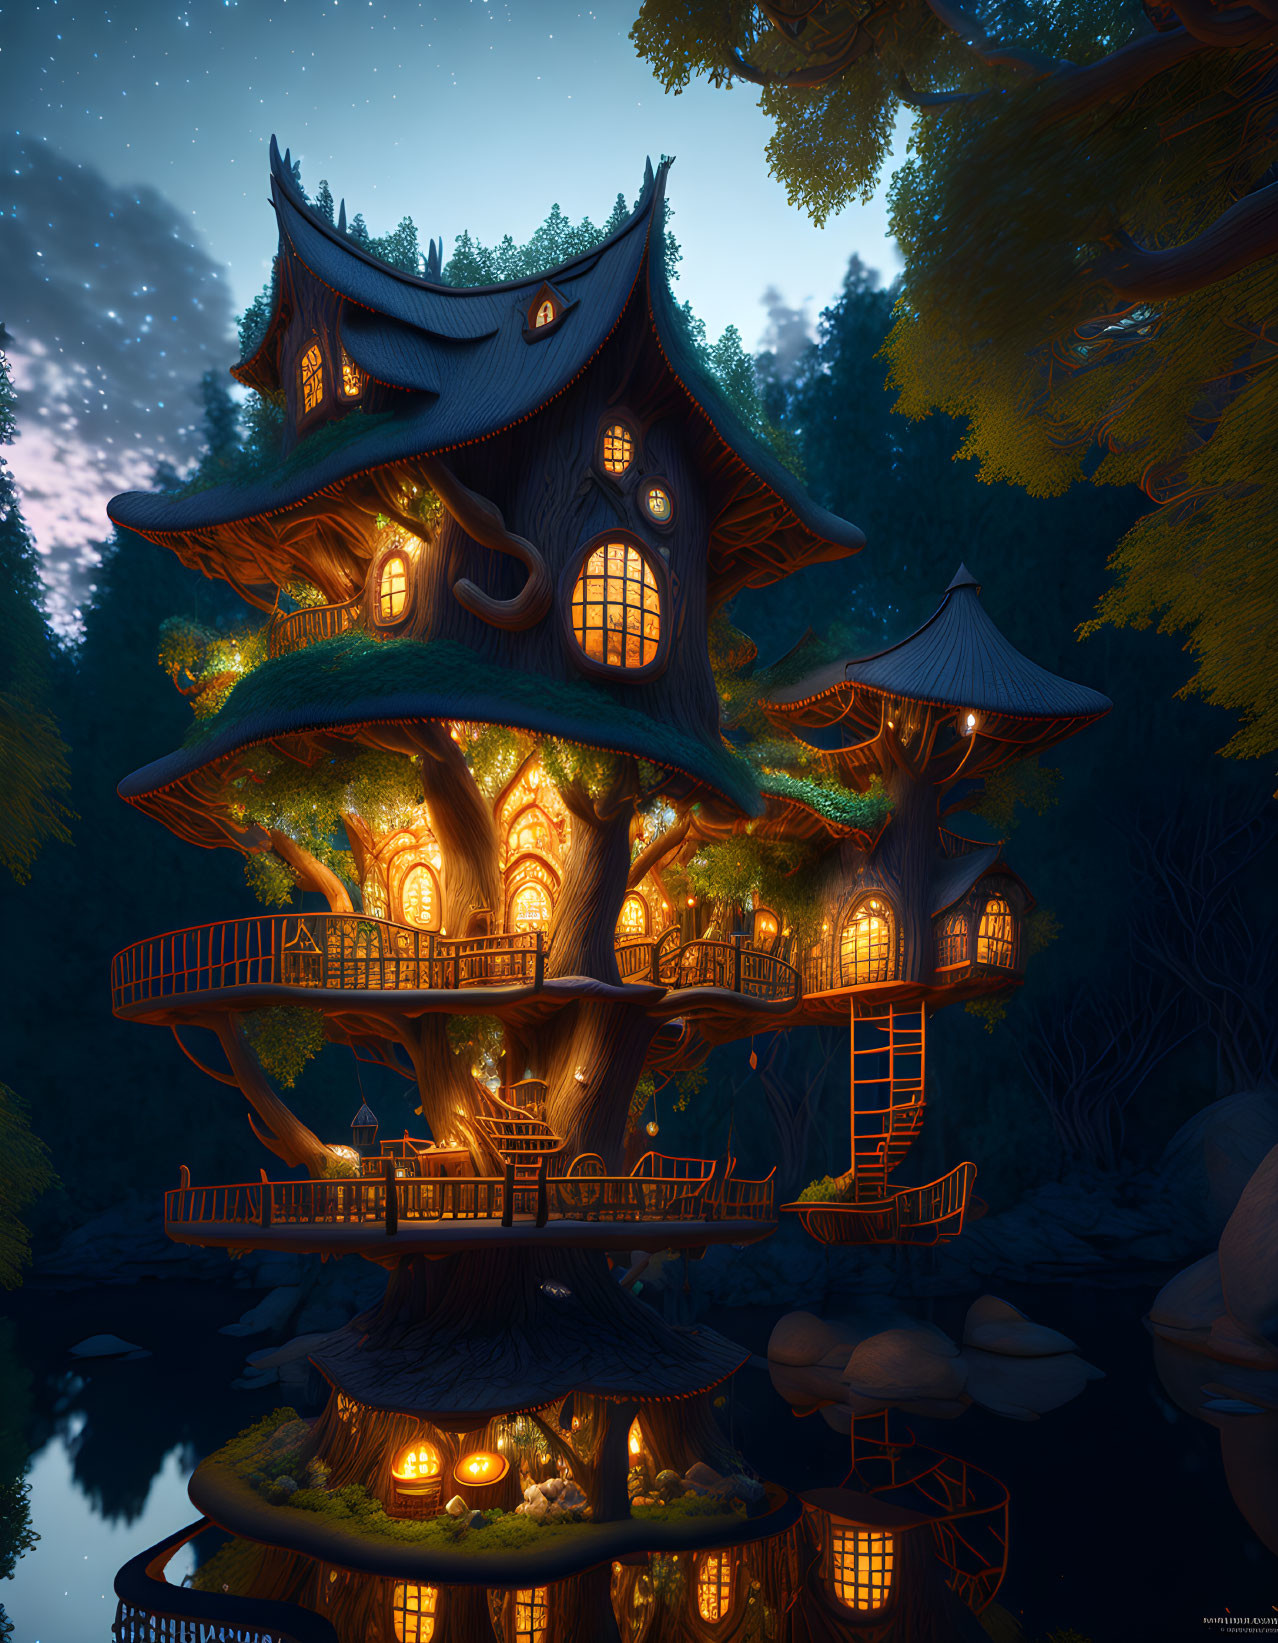 Serene forest twilight scene with glowing treehouse and pond